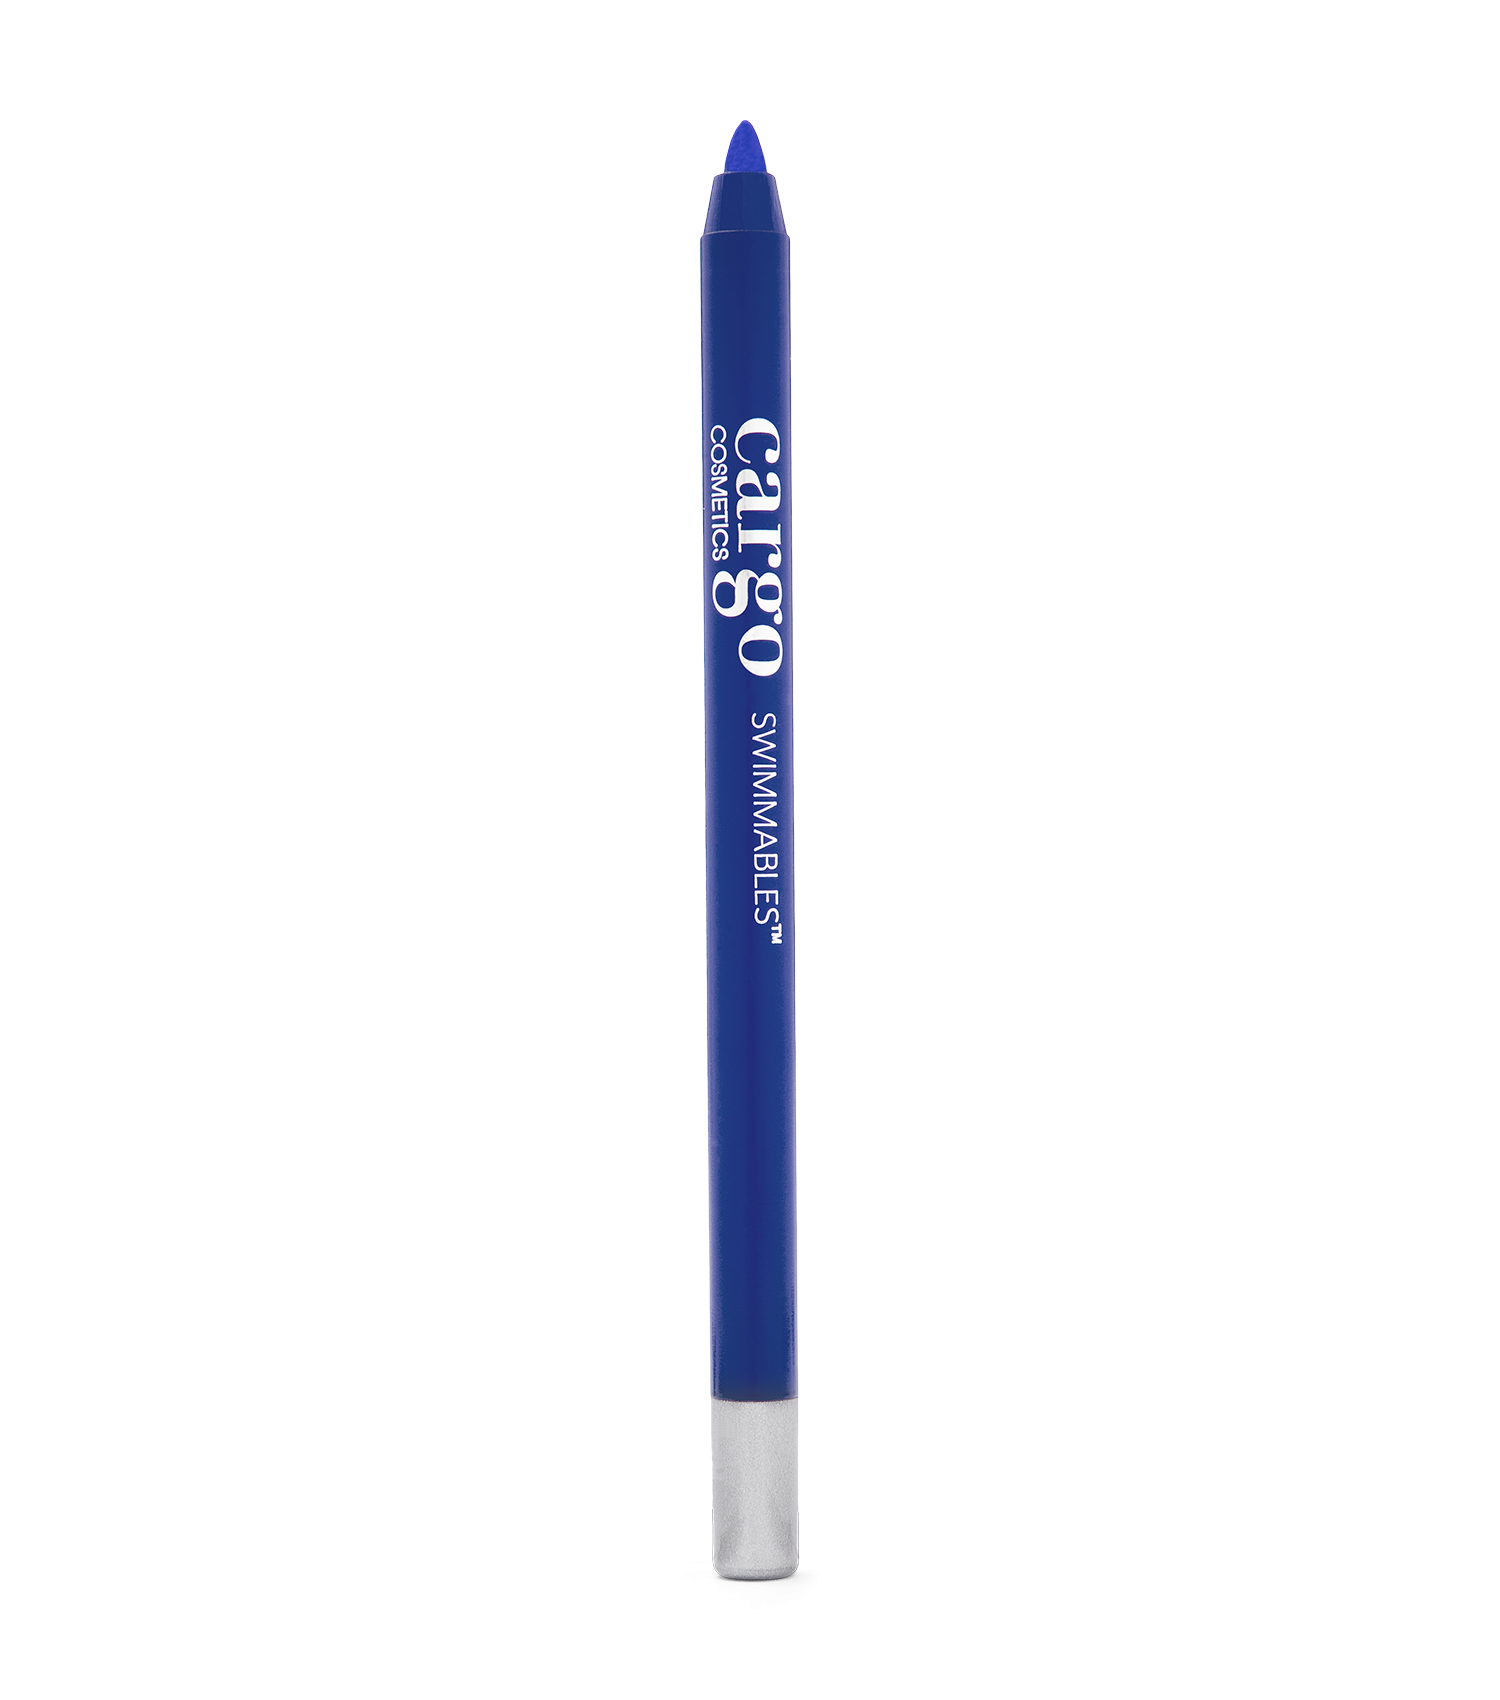 Swimmables™ Eye Liner Pencil Swimmables™ Eye Liner Pencil - Lake Geneva 1